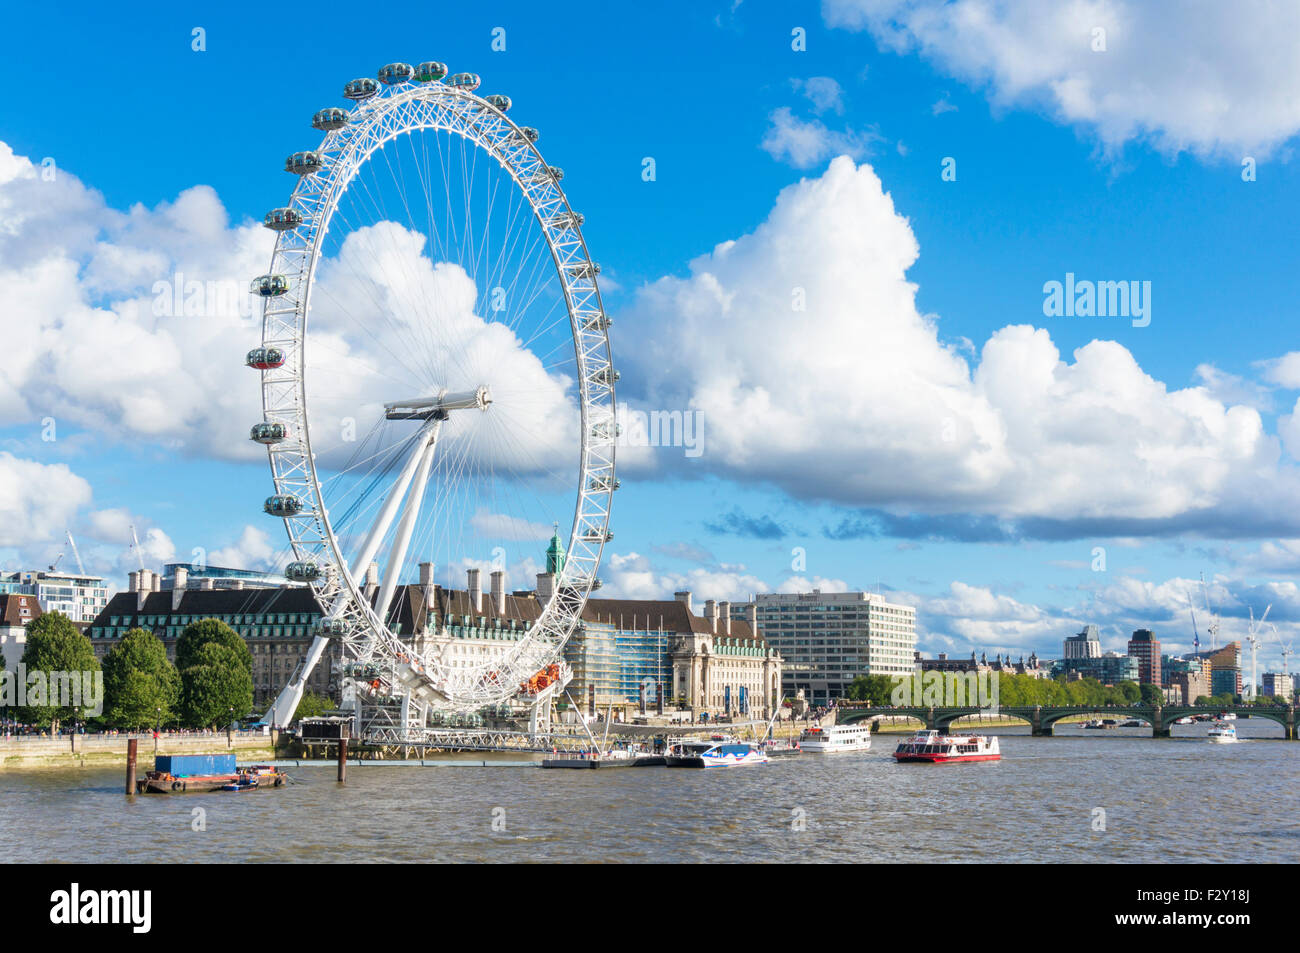 The London Eye on the South Bank of the River Thames London England GB UK EU Europe Stock Photo